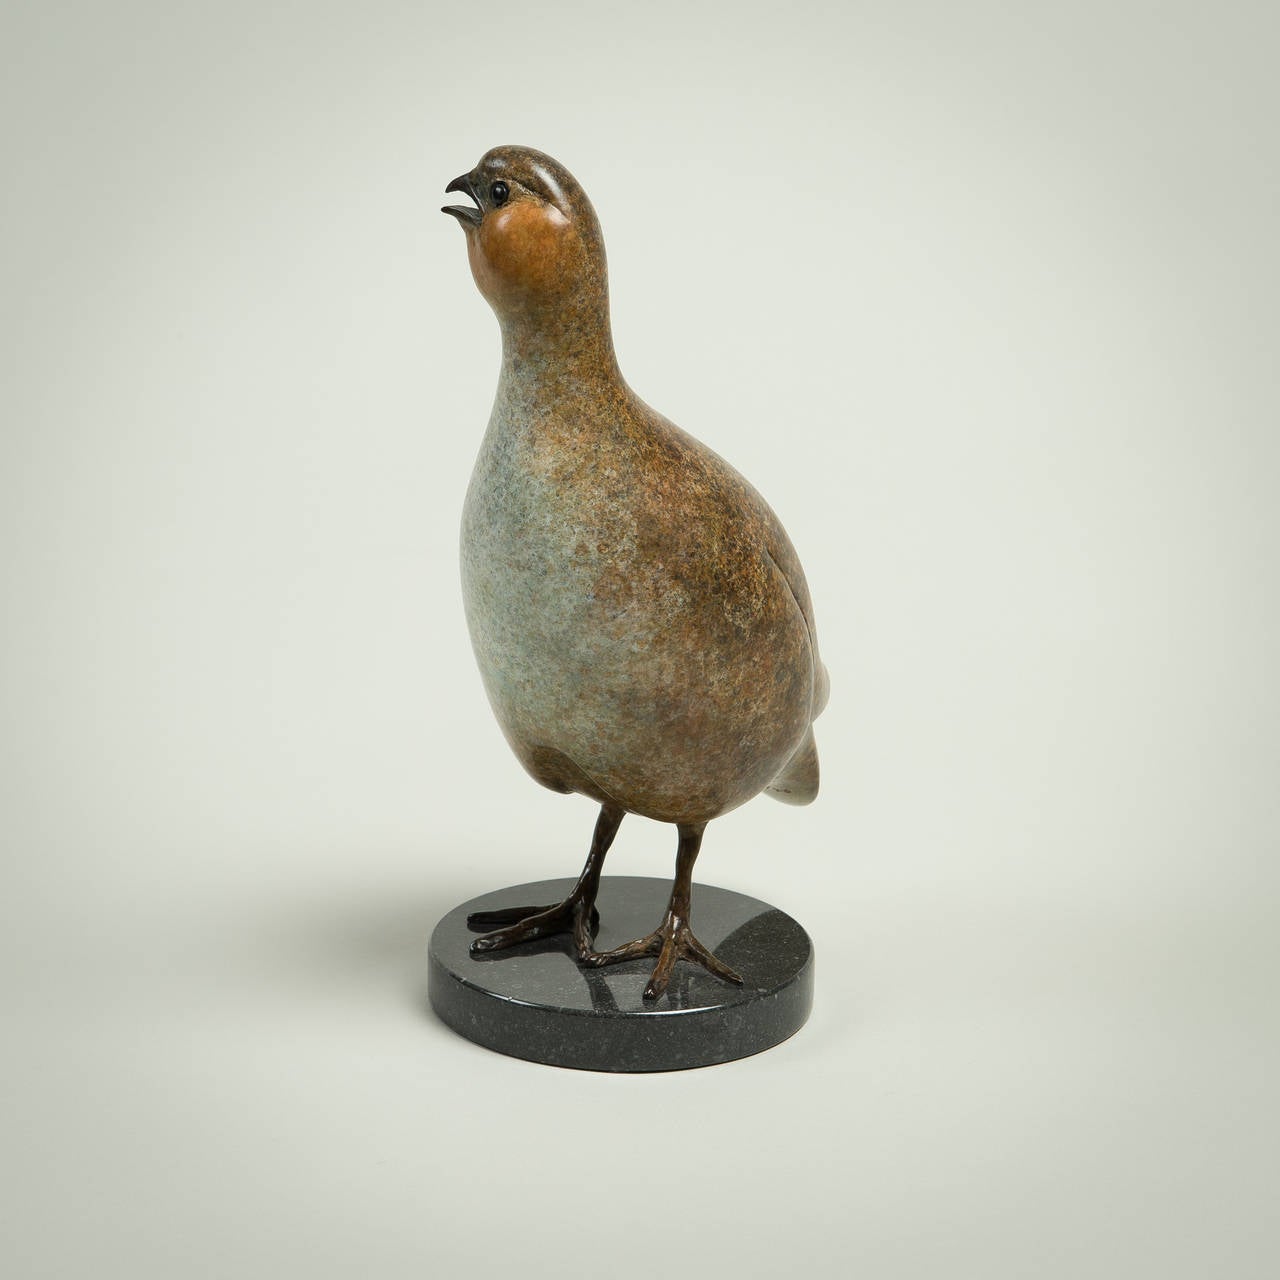 Contemporary Bronze Wildlife Sculpture 'Standing Partridge' by Richard Smith For Sale 2